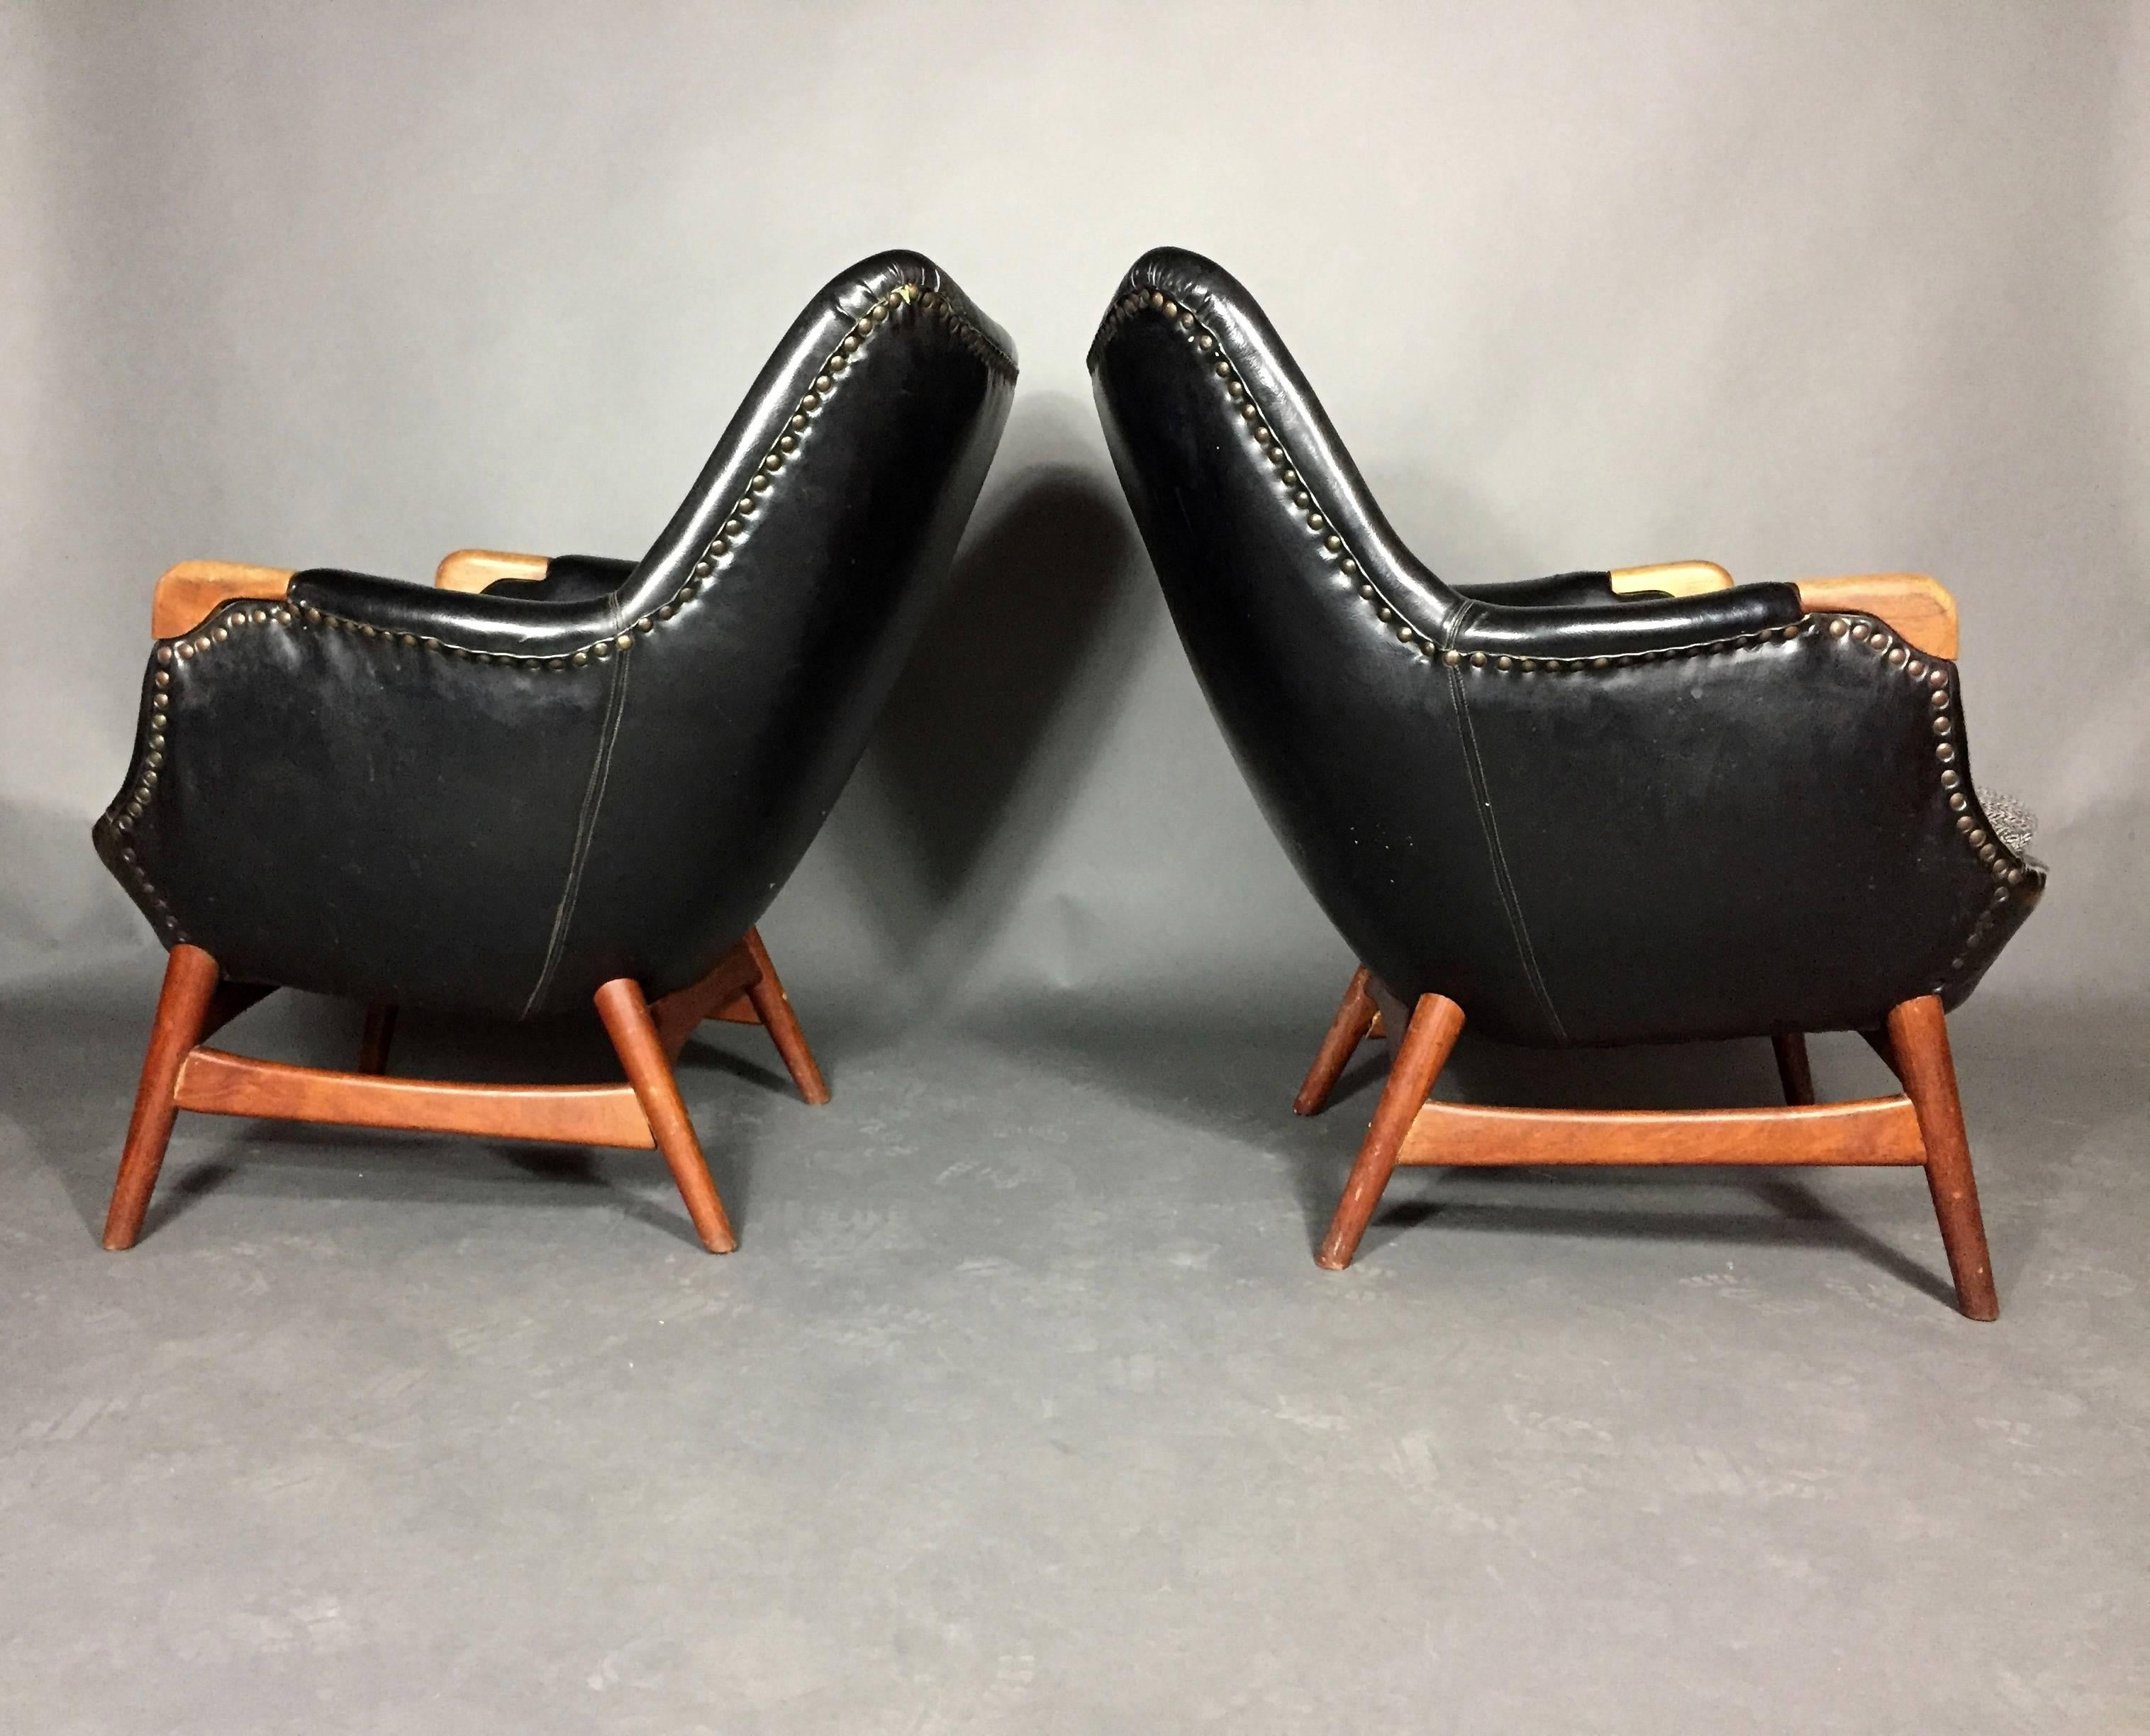 A rare pair of beautifully sculpted lounge chairs in black buttoned-back Naugahyde with brass tacks over teak frame. Carved teak armrest tips. Designed in 1956 by Erling Torvits. Denmark. Unmarked.

Some indentations to Naugahyde at back, repaired